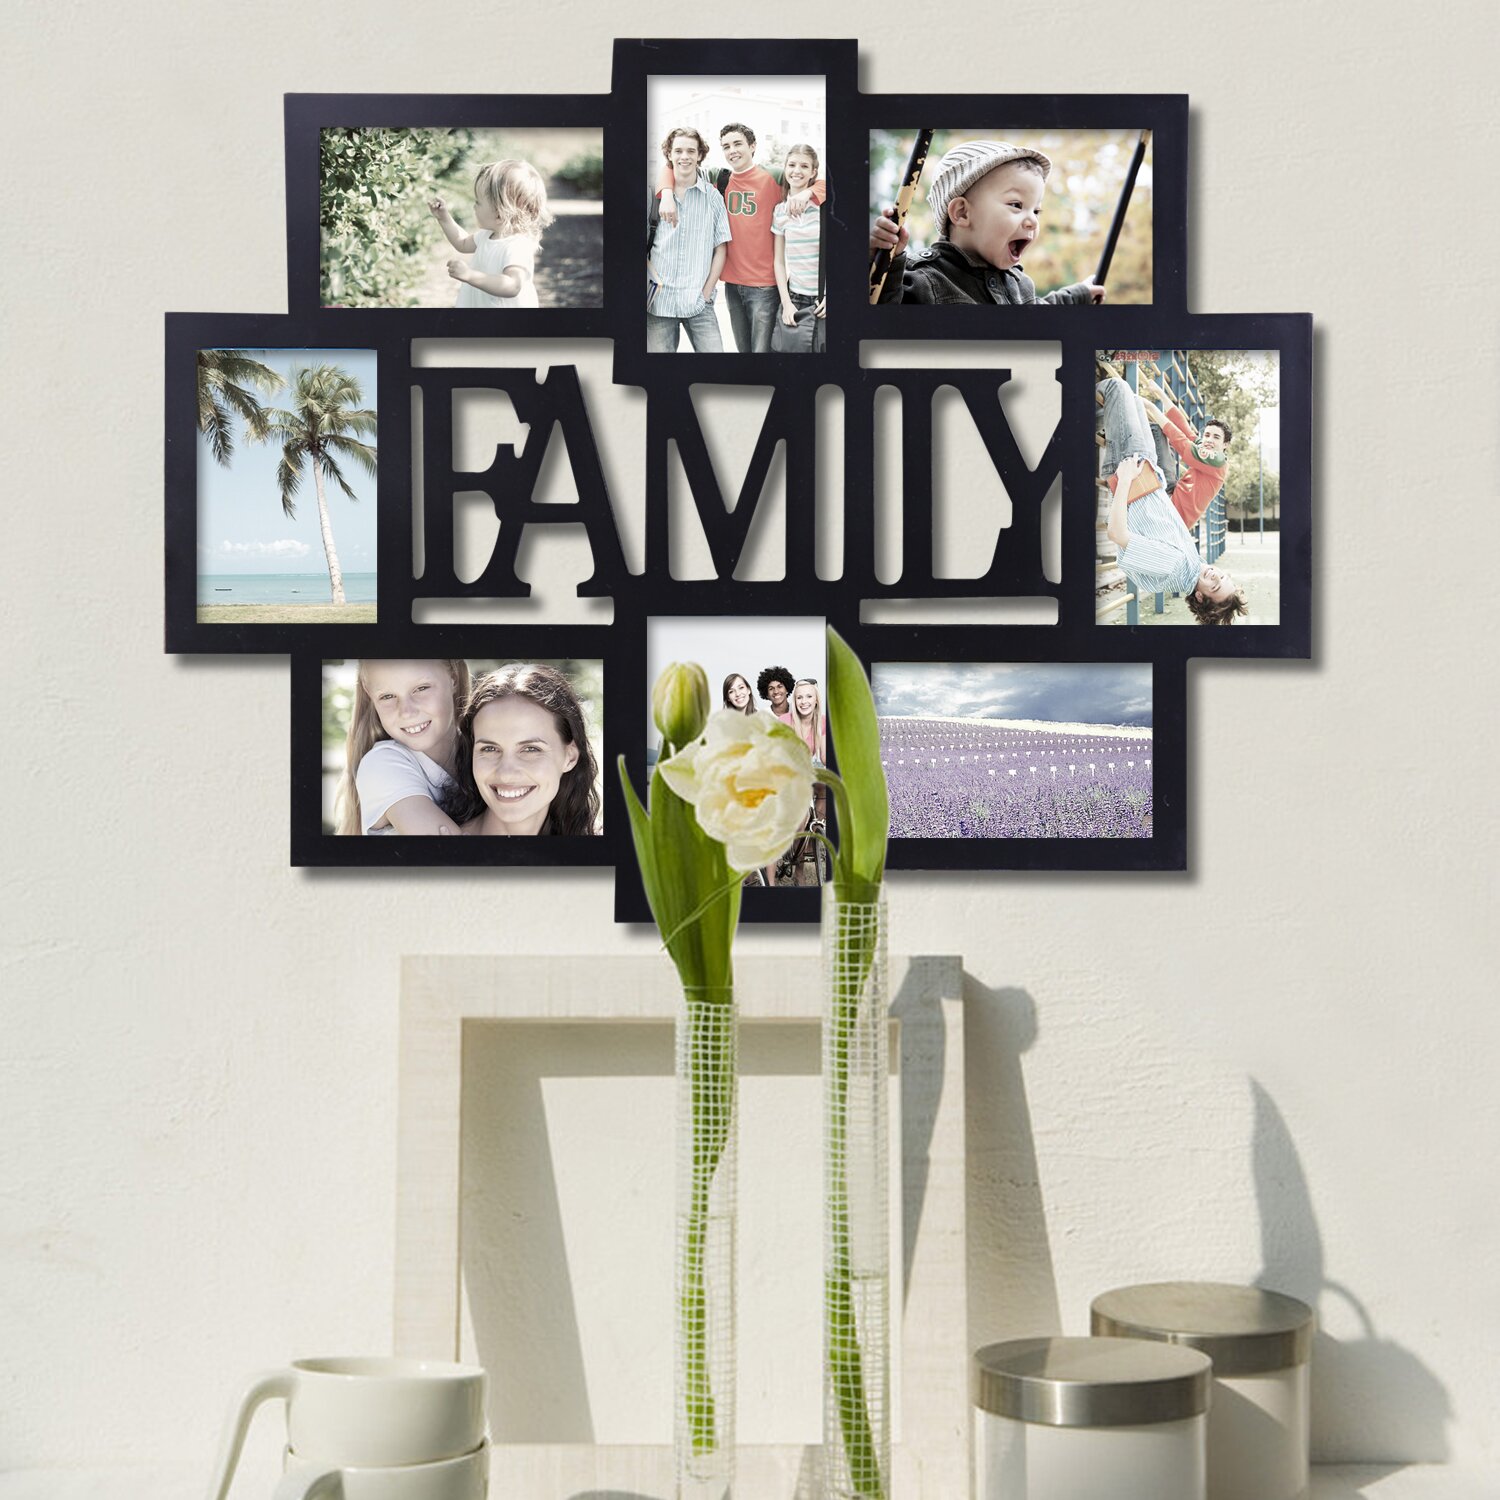 8 Opening Wooden Photo Collage Wall Hanging Picture Frame | Wayfair